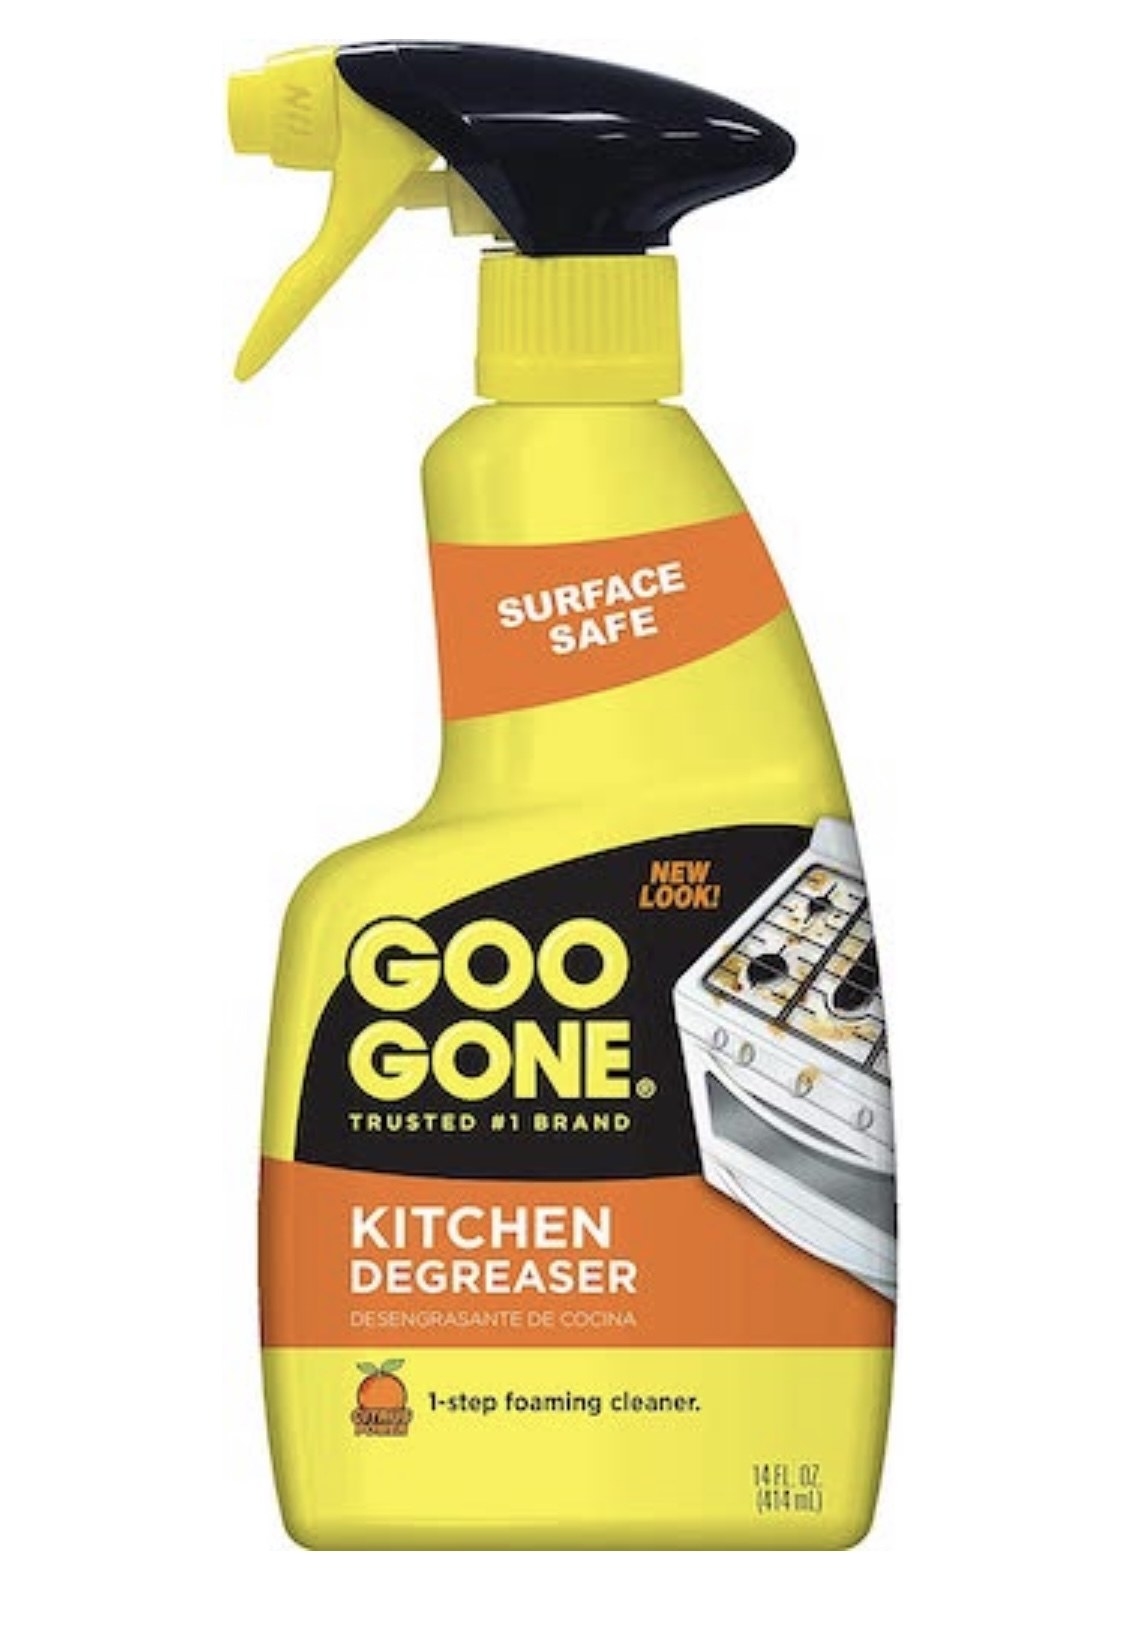 A bottle of the kitchen degreaser